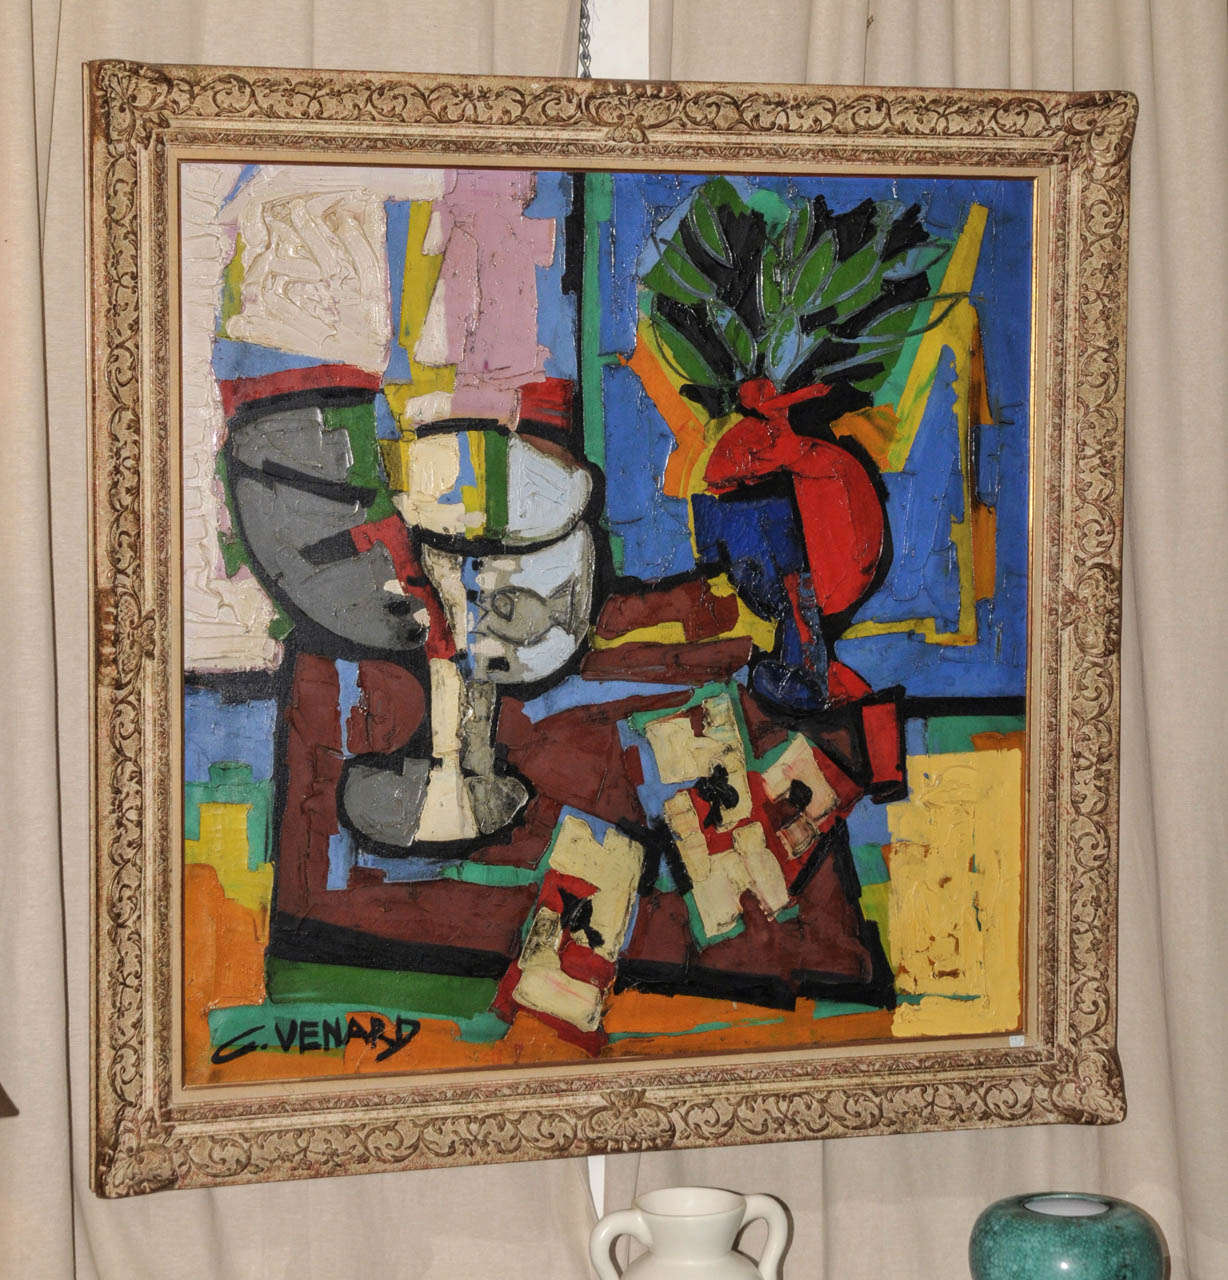 1950-1960's oil on canvas painting by Claude Venard (1913-1999). Post-cubism period. Original wood frame. Good condition. Normal wear consistent with age and use.